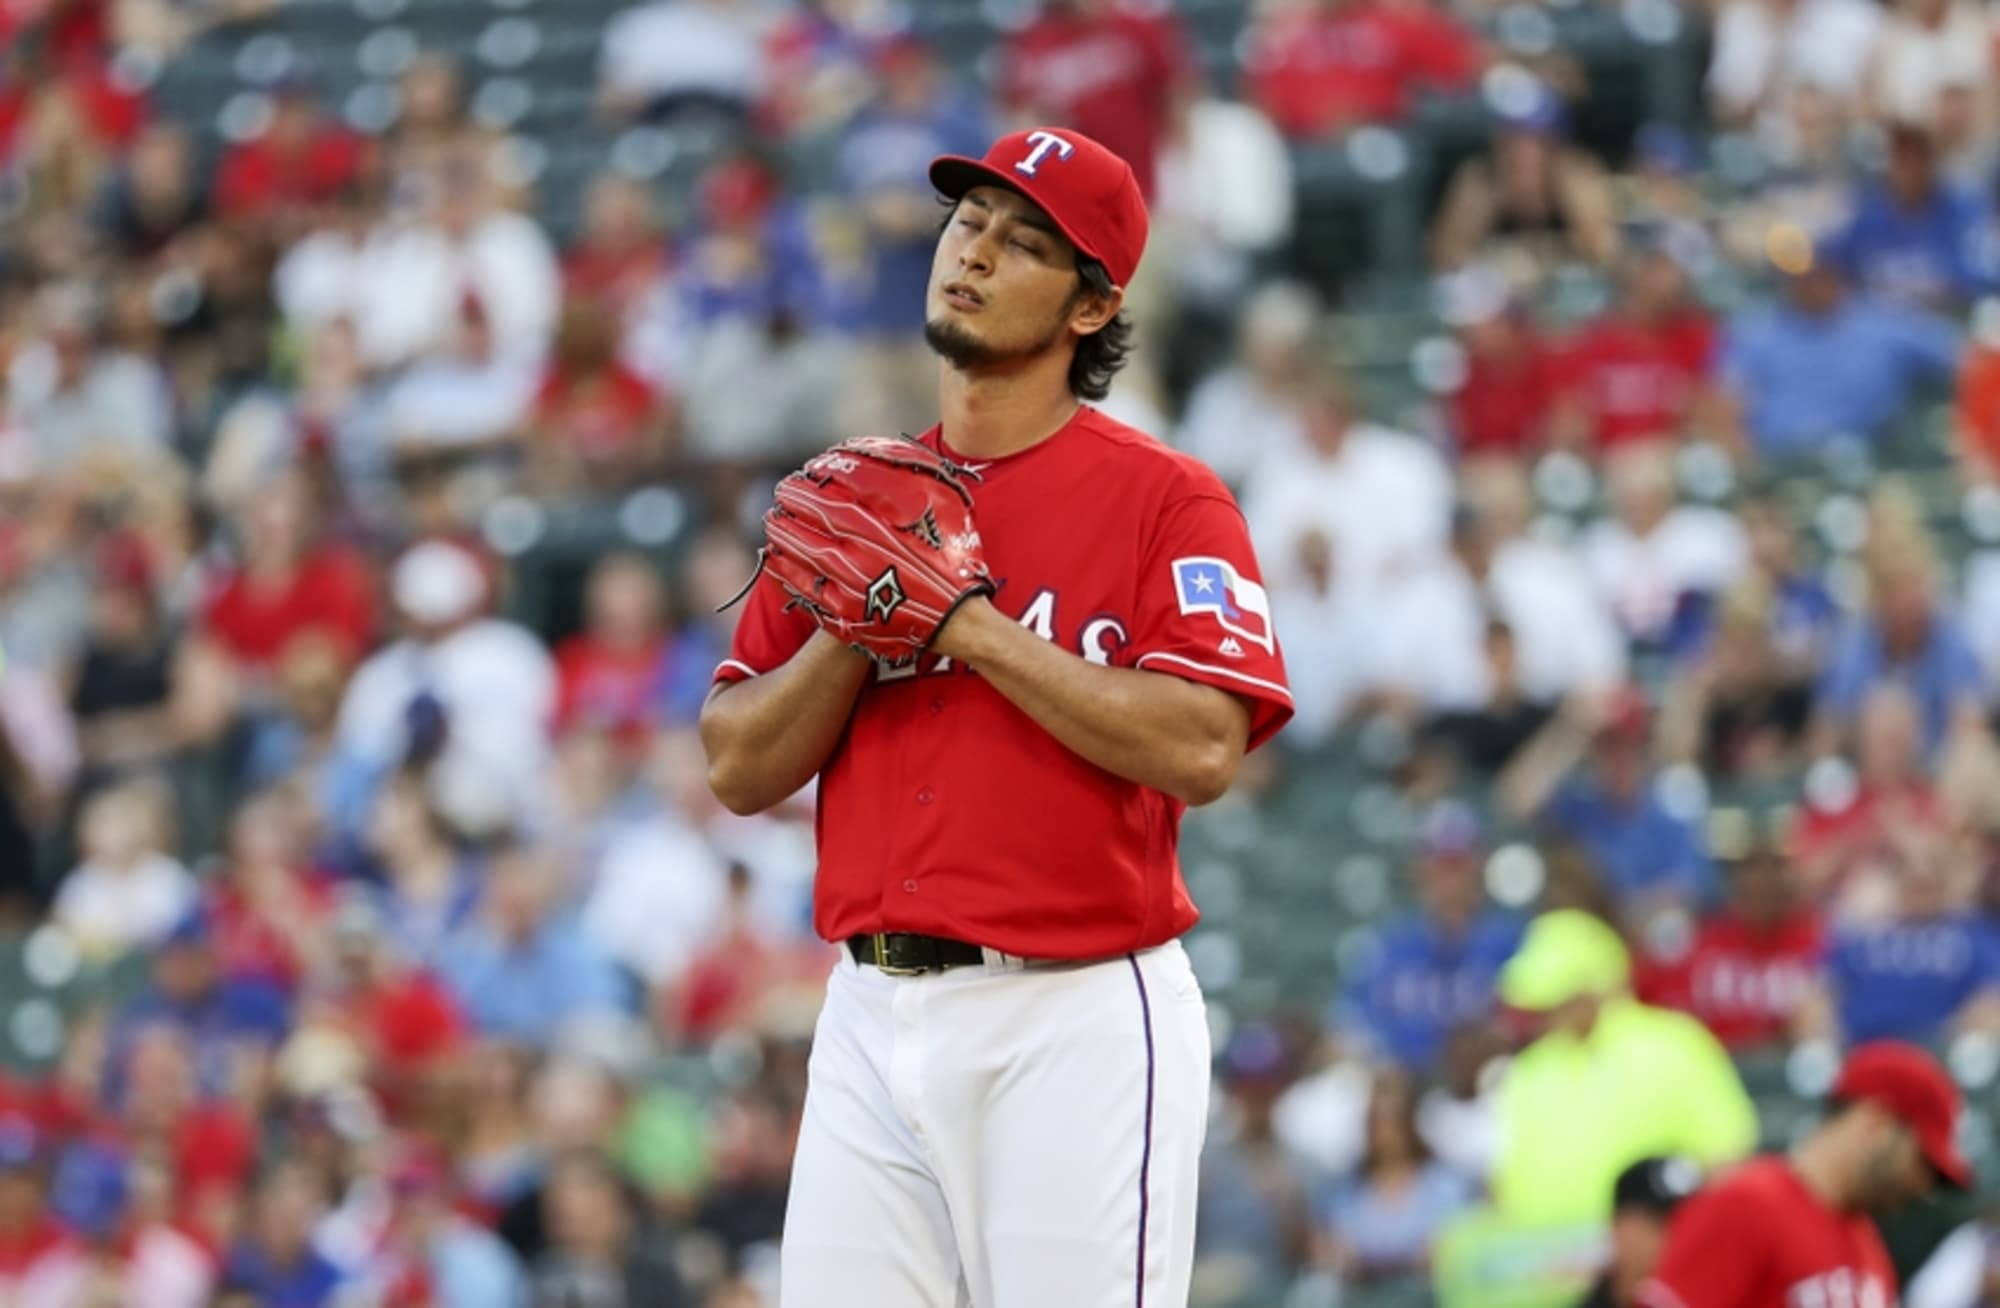 Texas Rangers Pitcher Yu Darvish to Have Tommy John Surgery